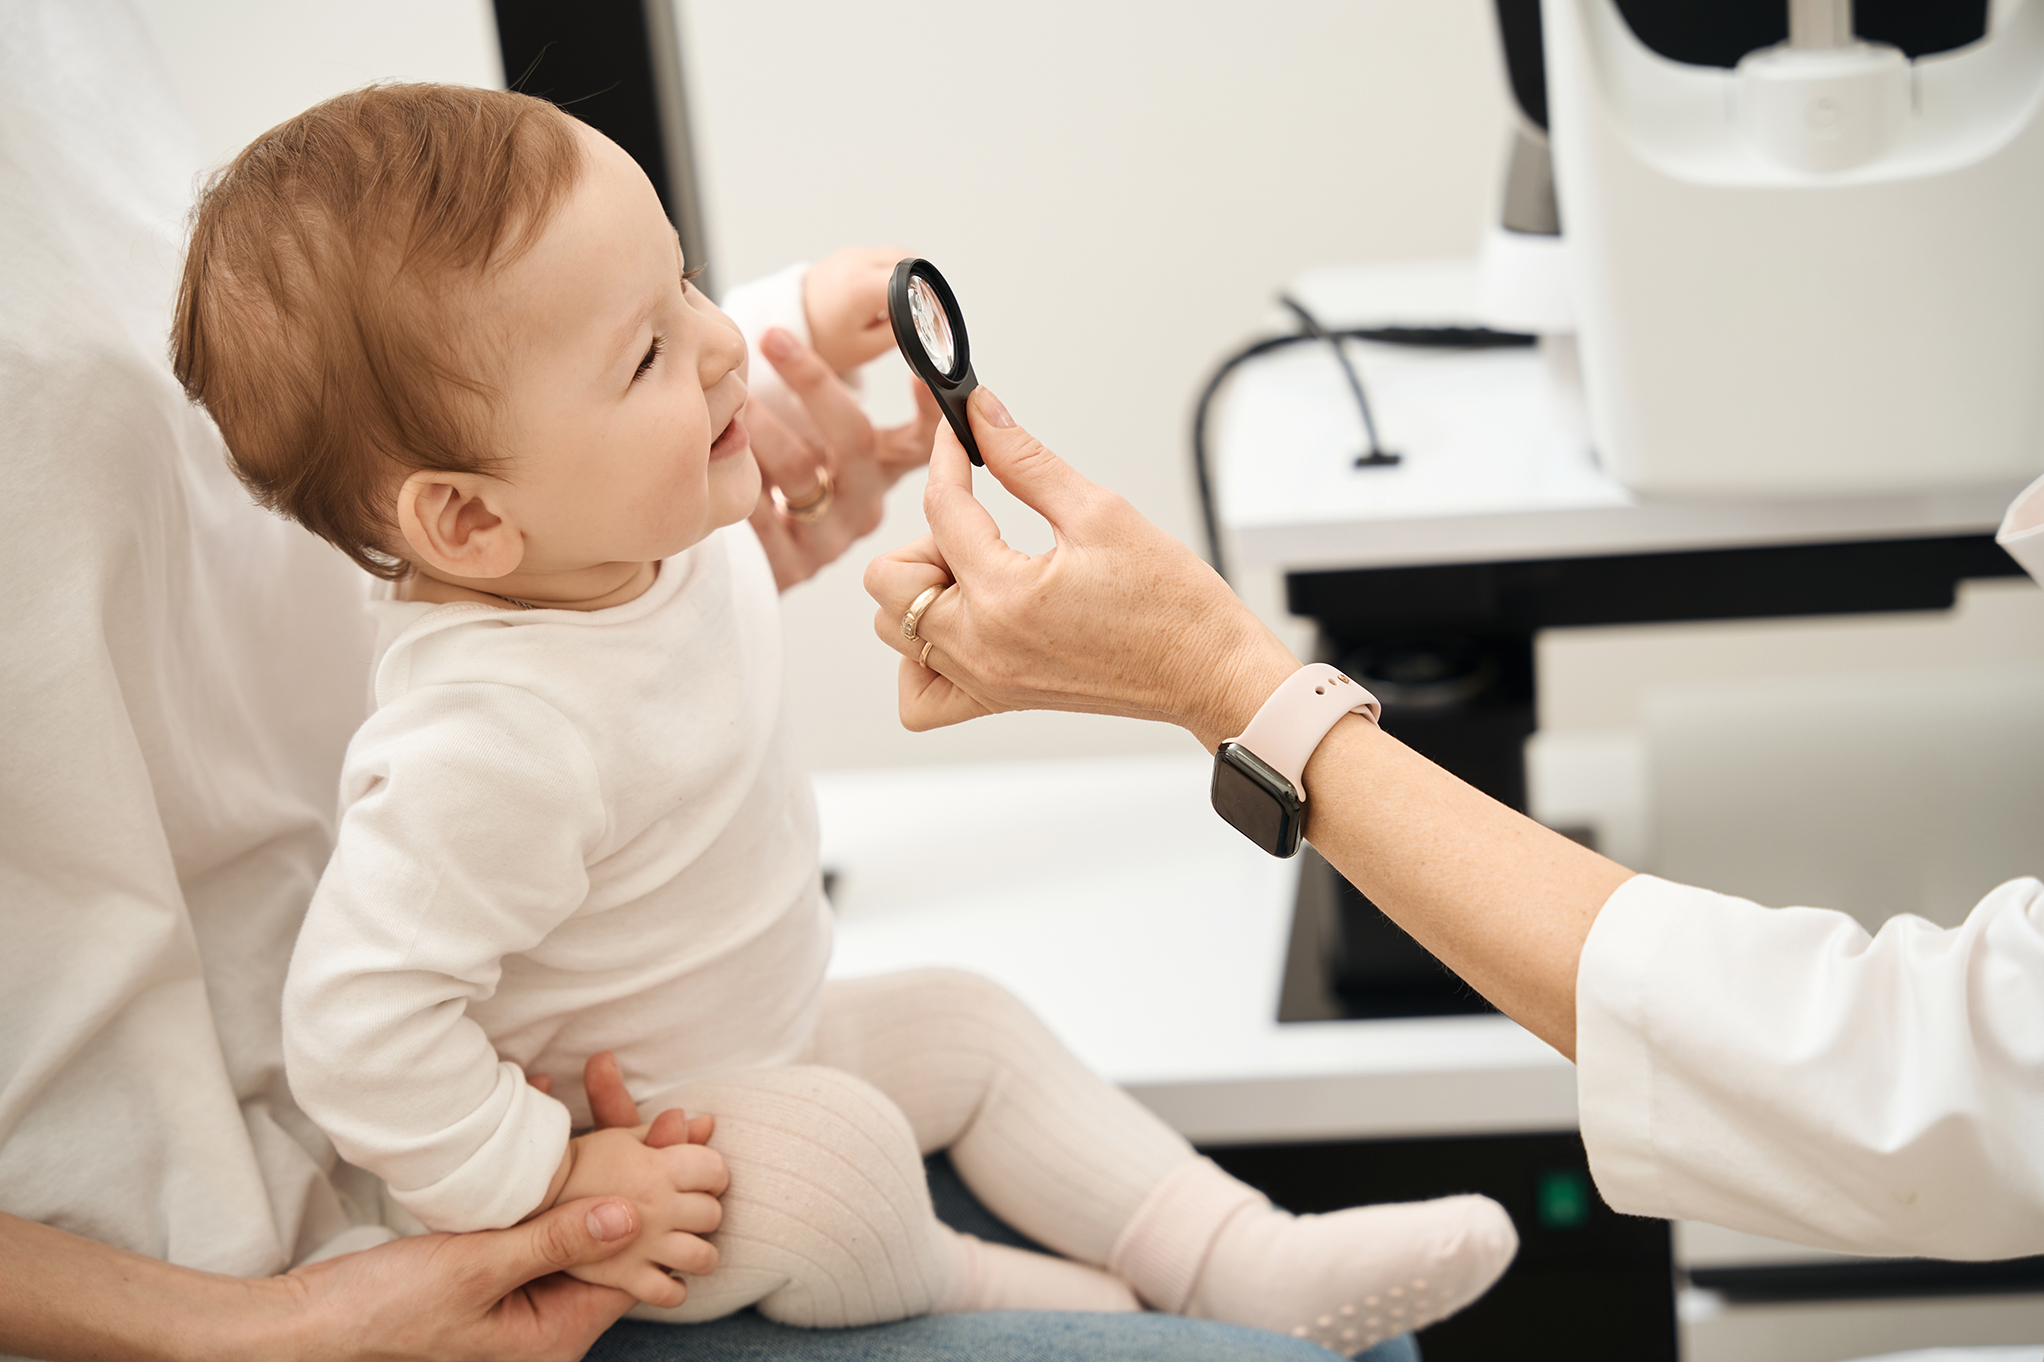 infant eye exam in parker colorado at good isight